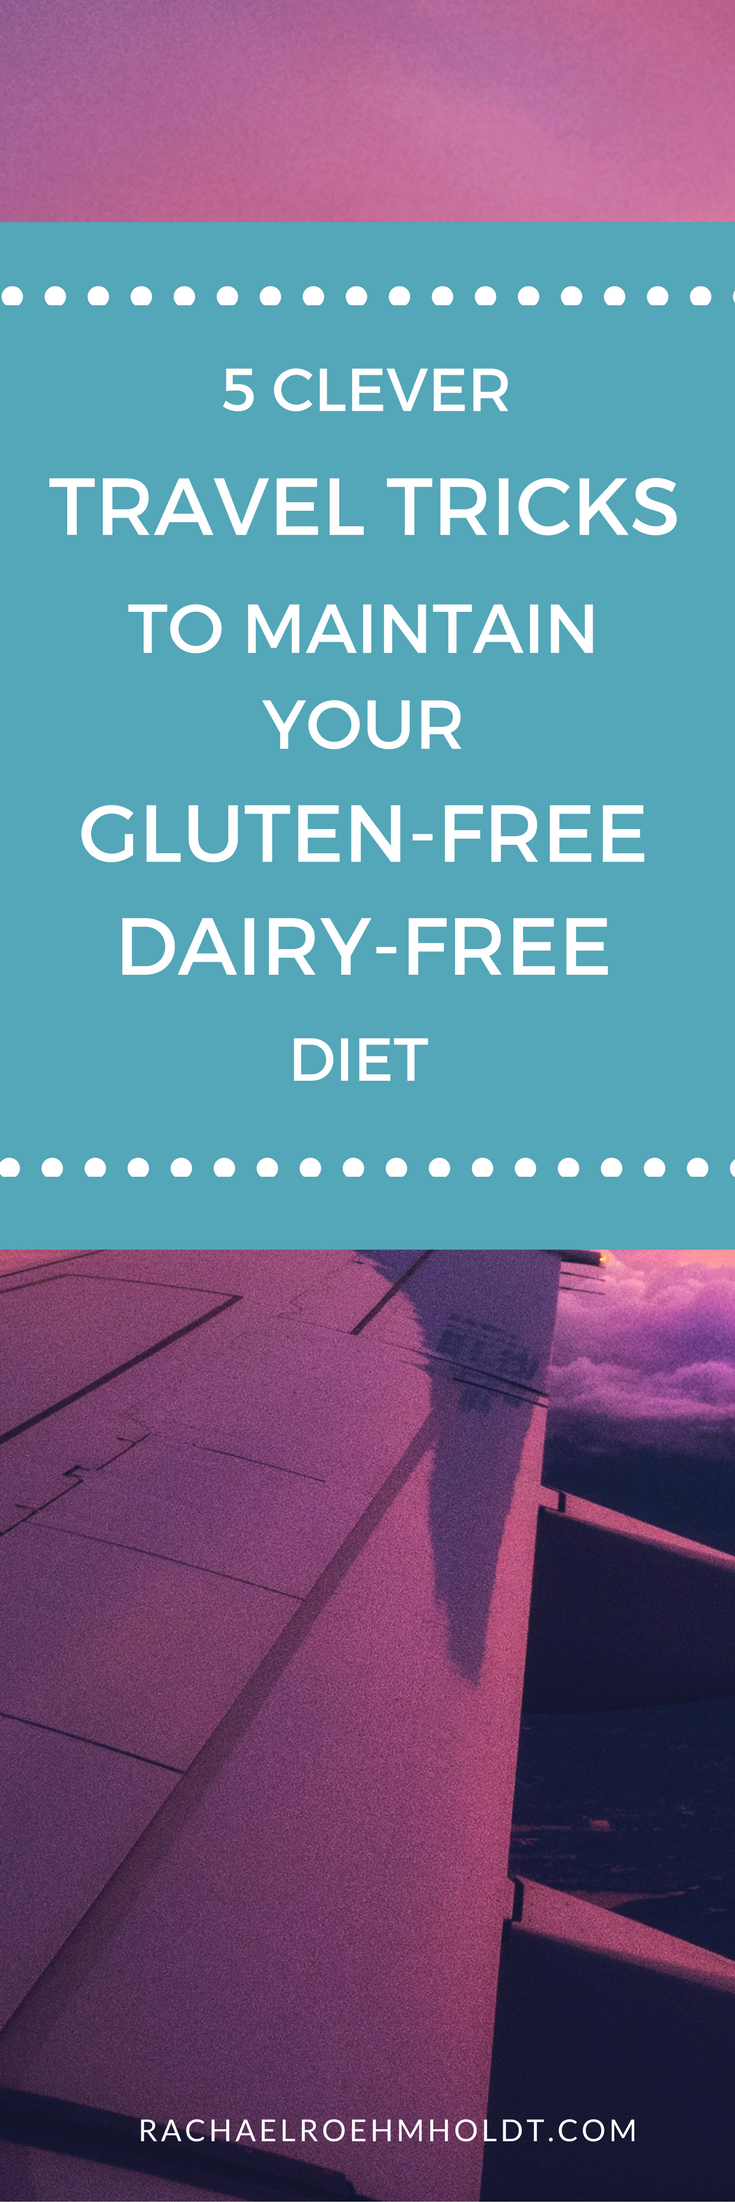 5 Clever Travel Tricks to Maintain Your Gluten-free Dairy-free Diet from RachaelRoehmholdt.com